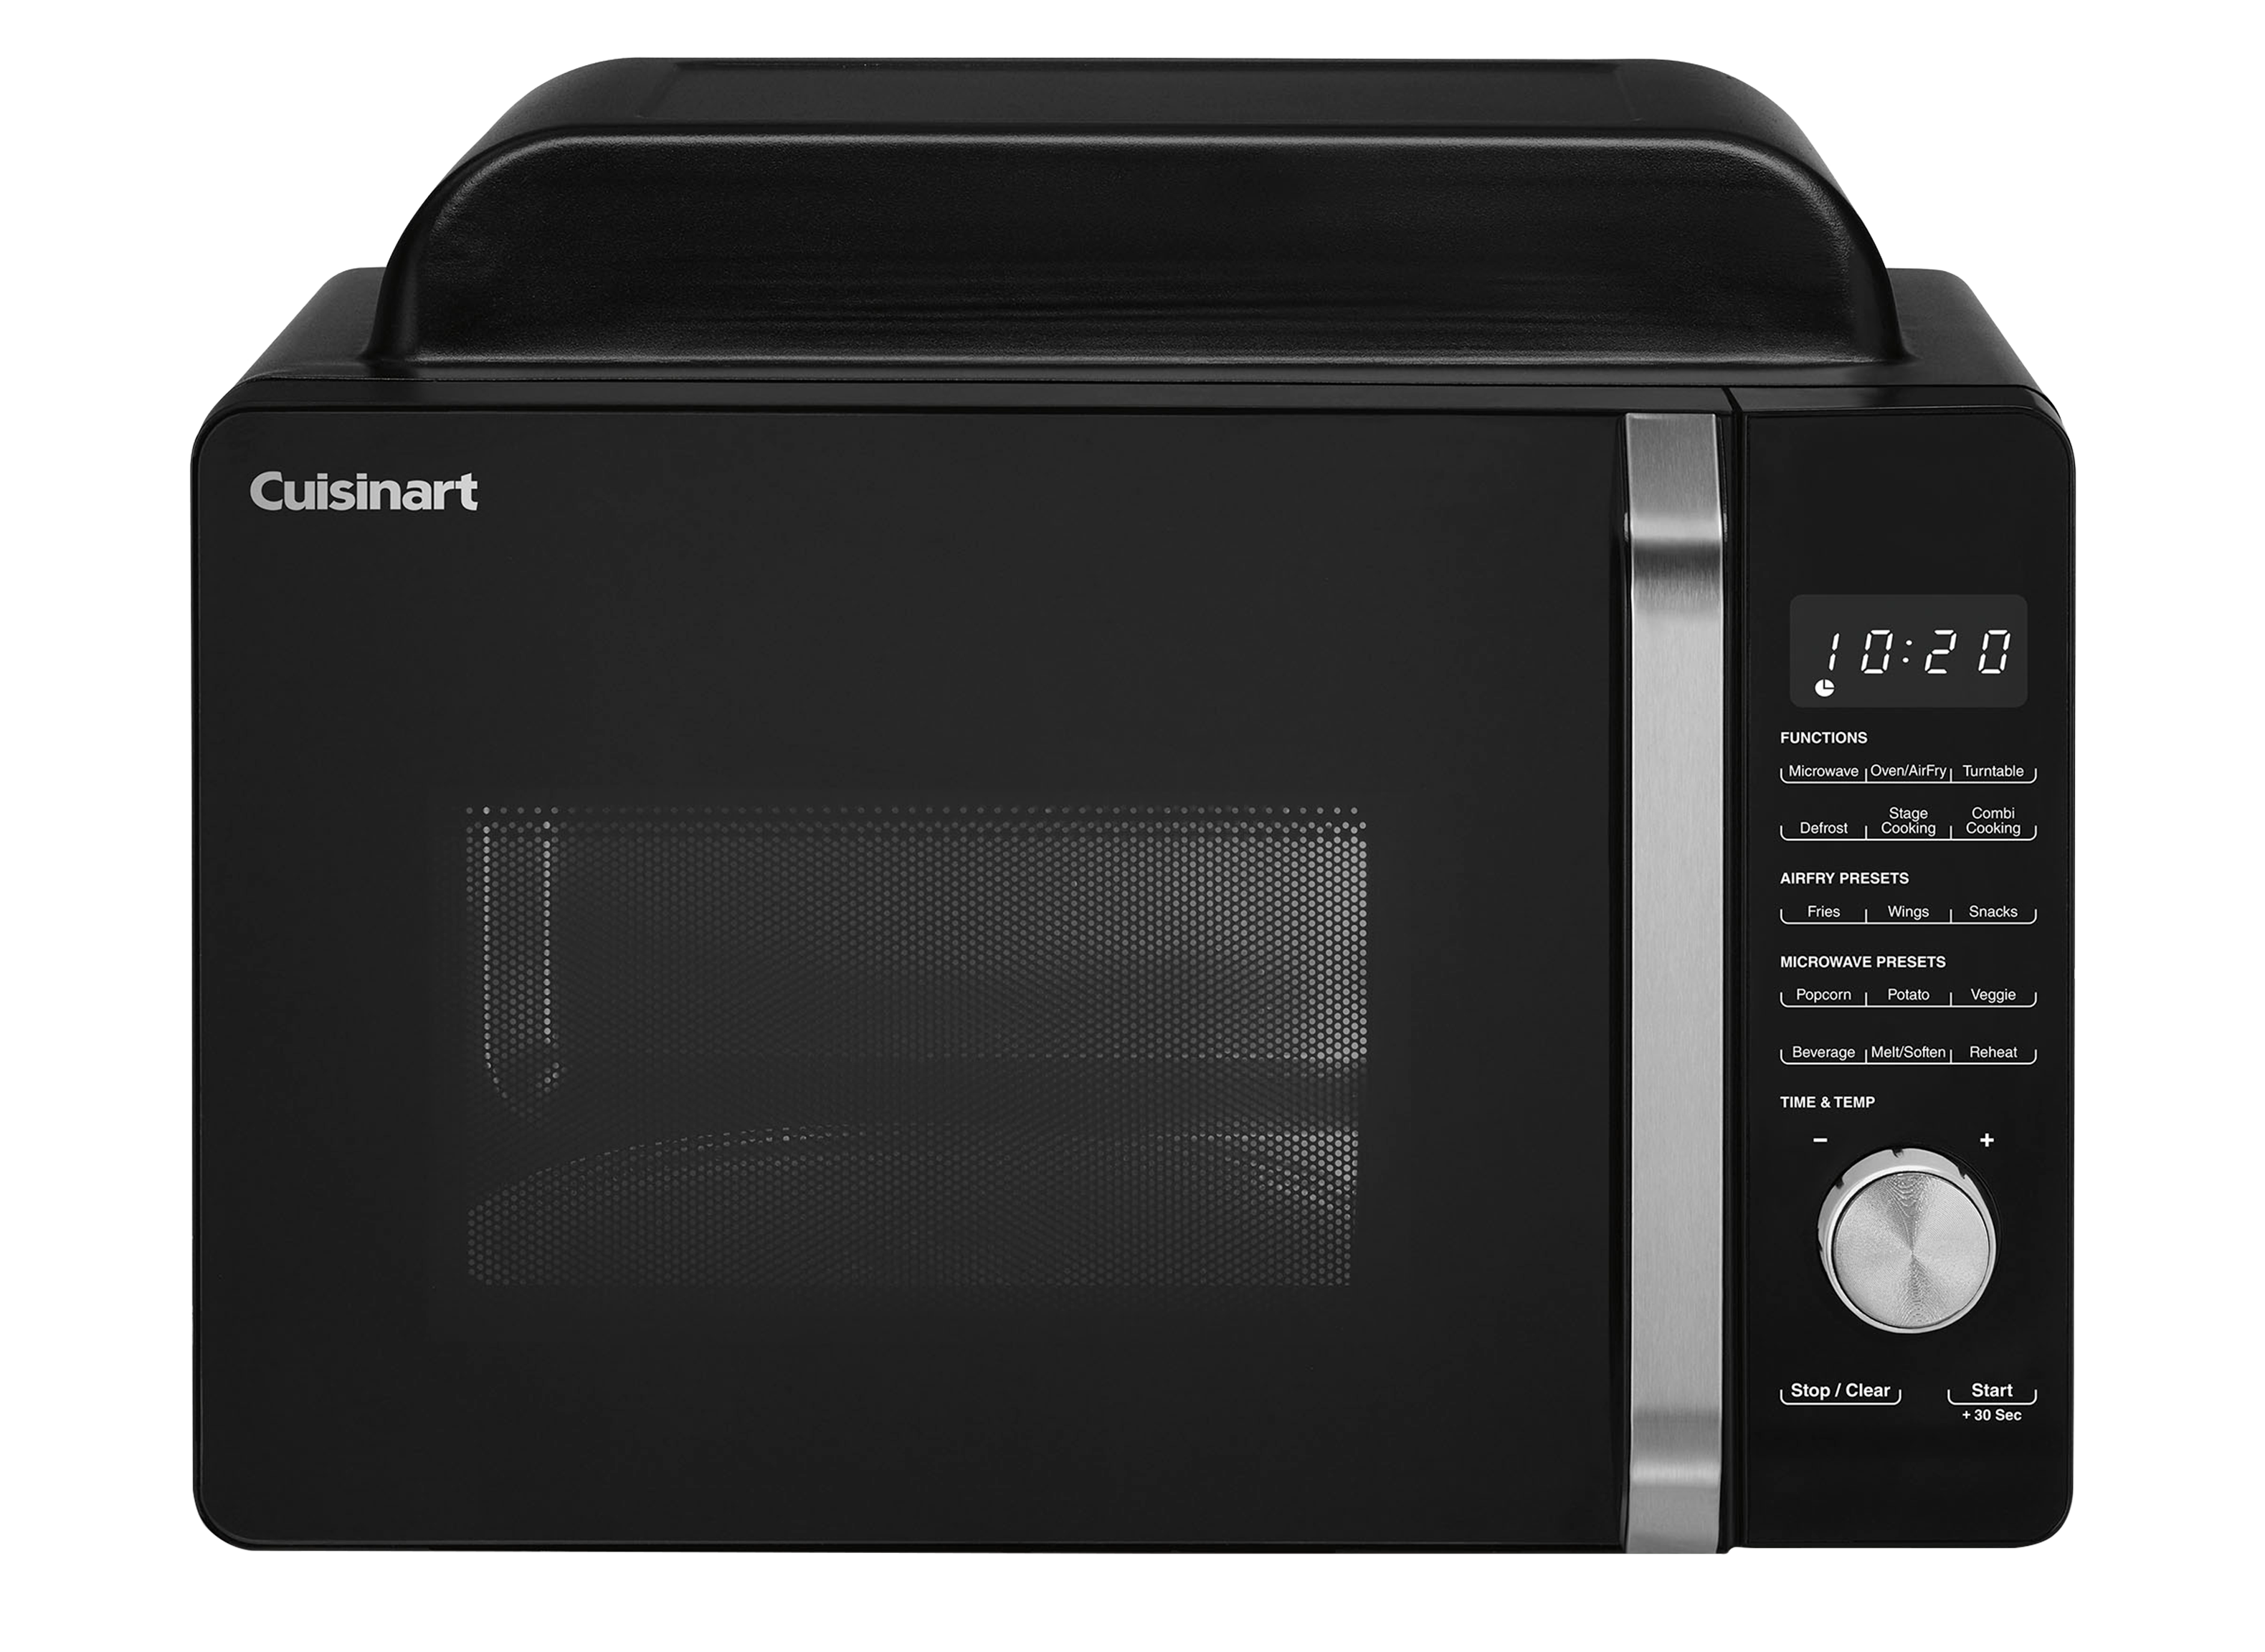  Cuisinart CMW-200 1.2-Cubic-Foot Convection Microwave Oven with  Grill, Stainless Steel: Countertop Microwave Ovens: Home & Kitchen